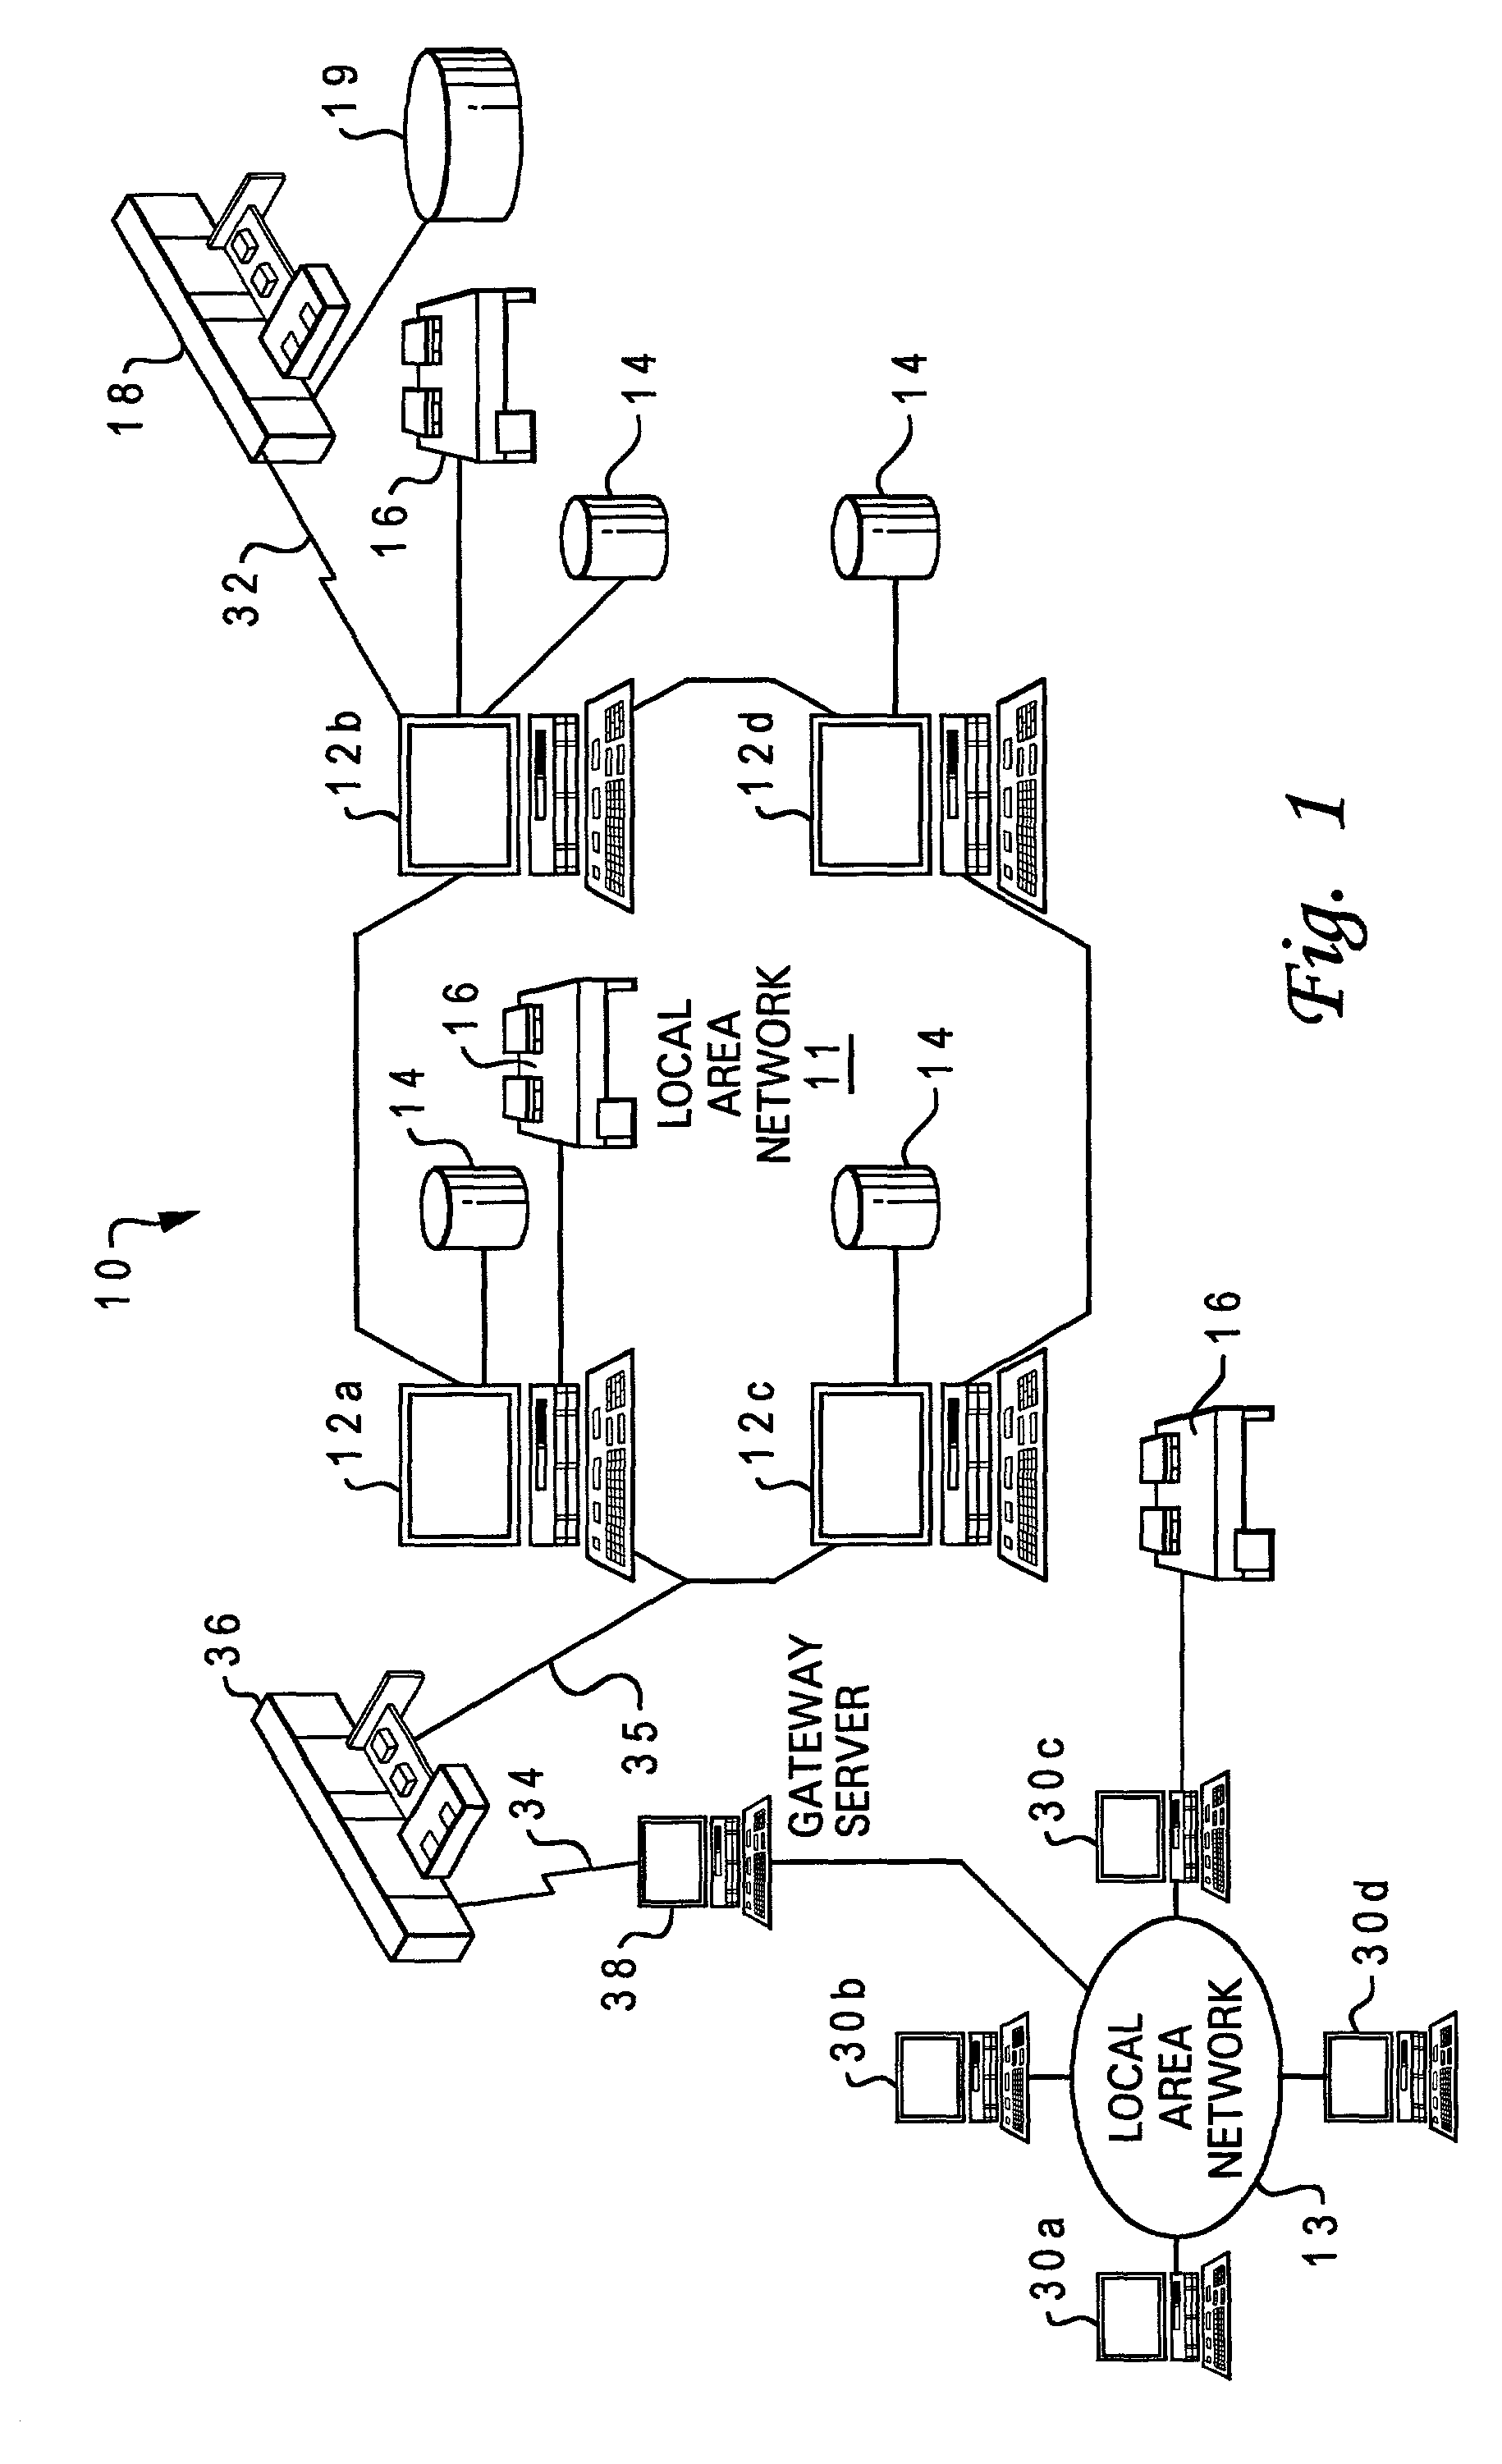 Method for resolving meeting conflicts within an electronic calendar application